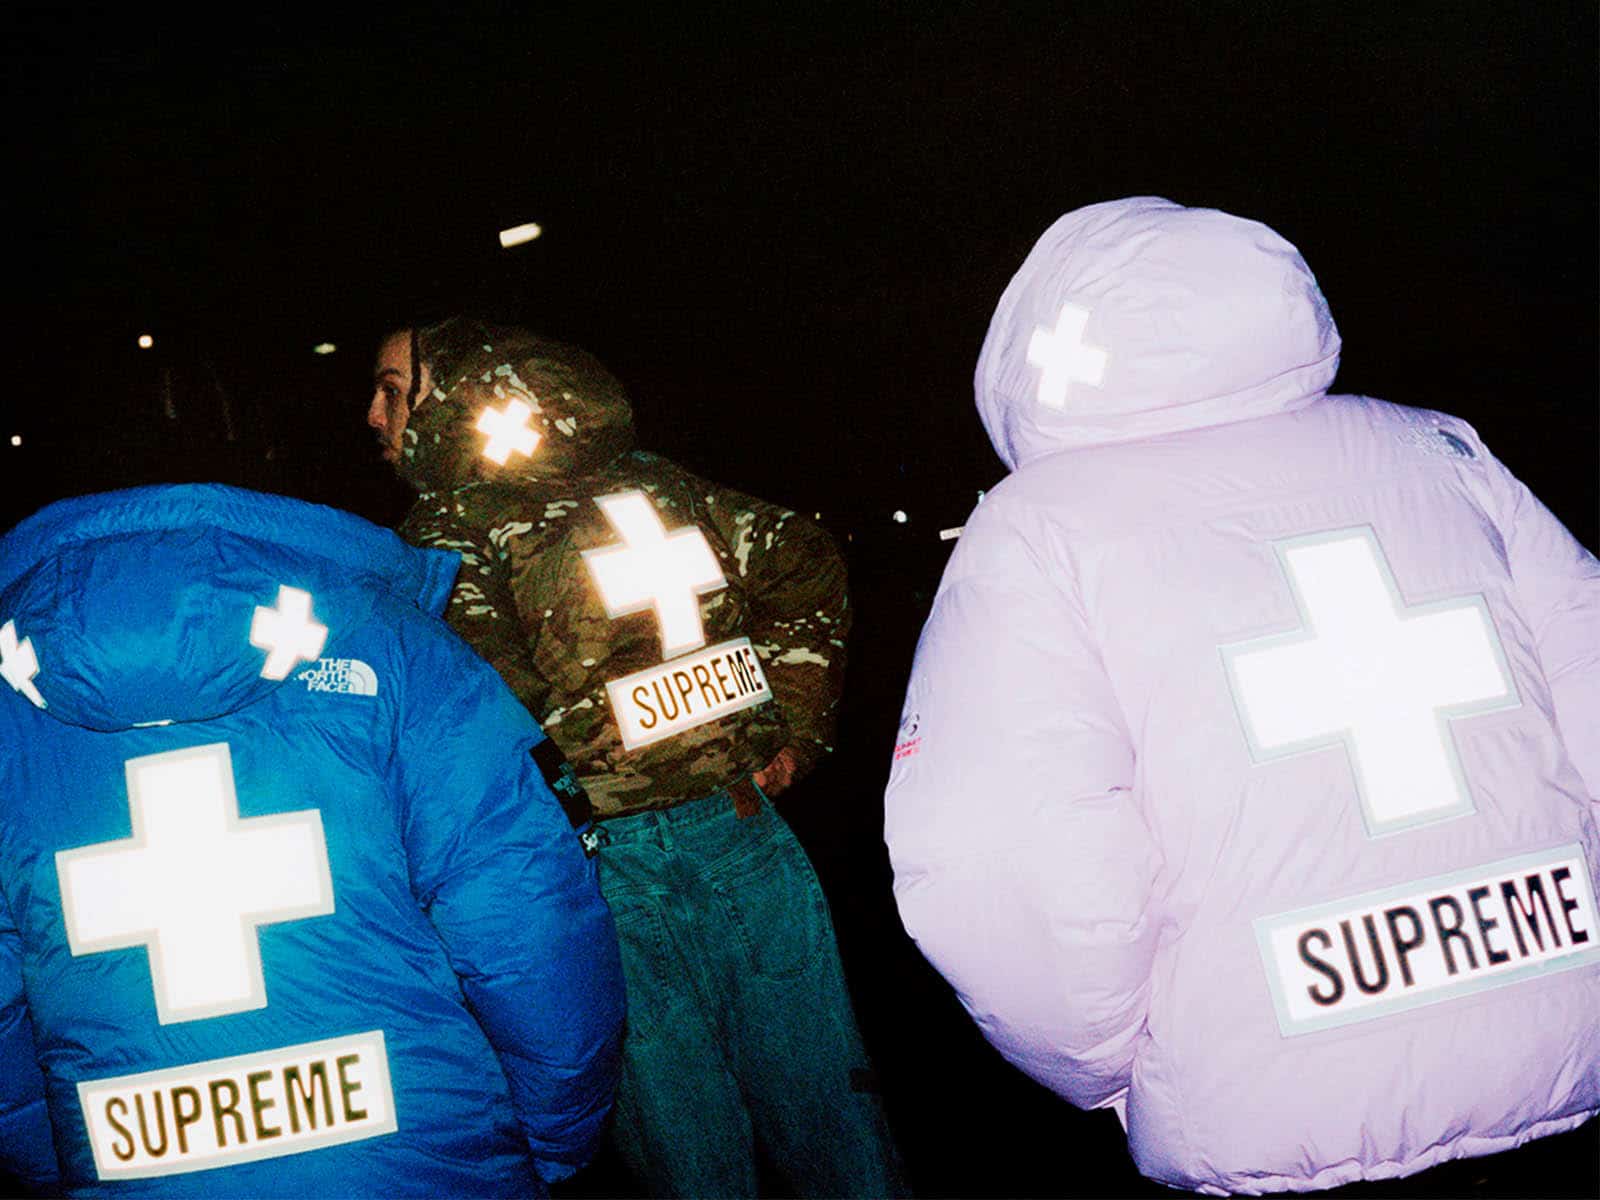 Supreme x The North Face continue to expand their universe for 